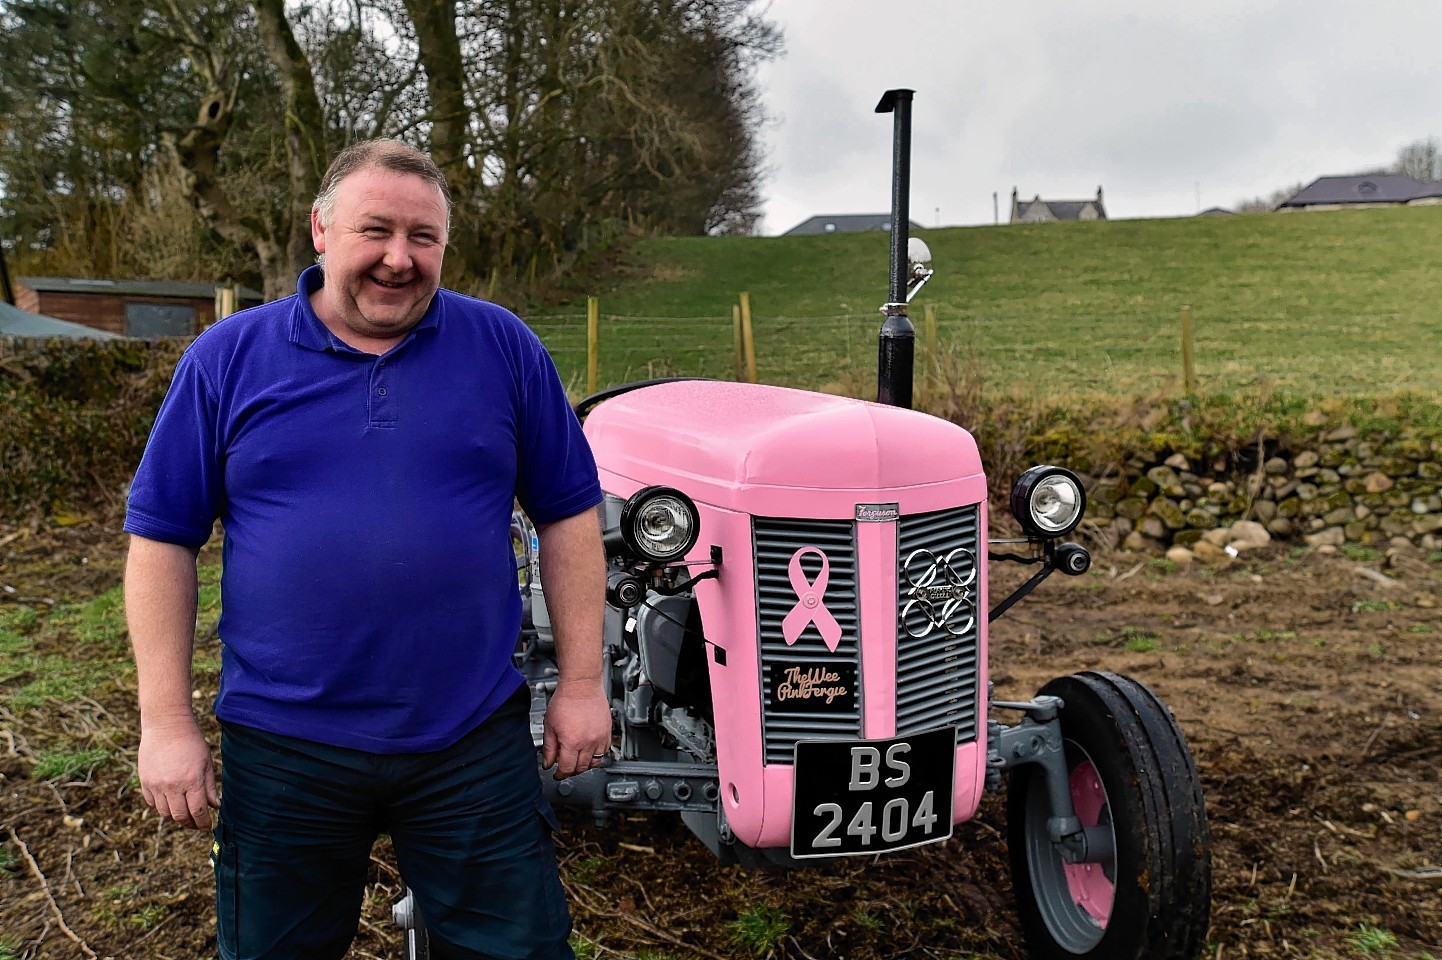 ME AND MY CAR (DUNCAN BROWN) KEVIN INNES AND HIS PINK FERGIE.